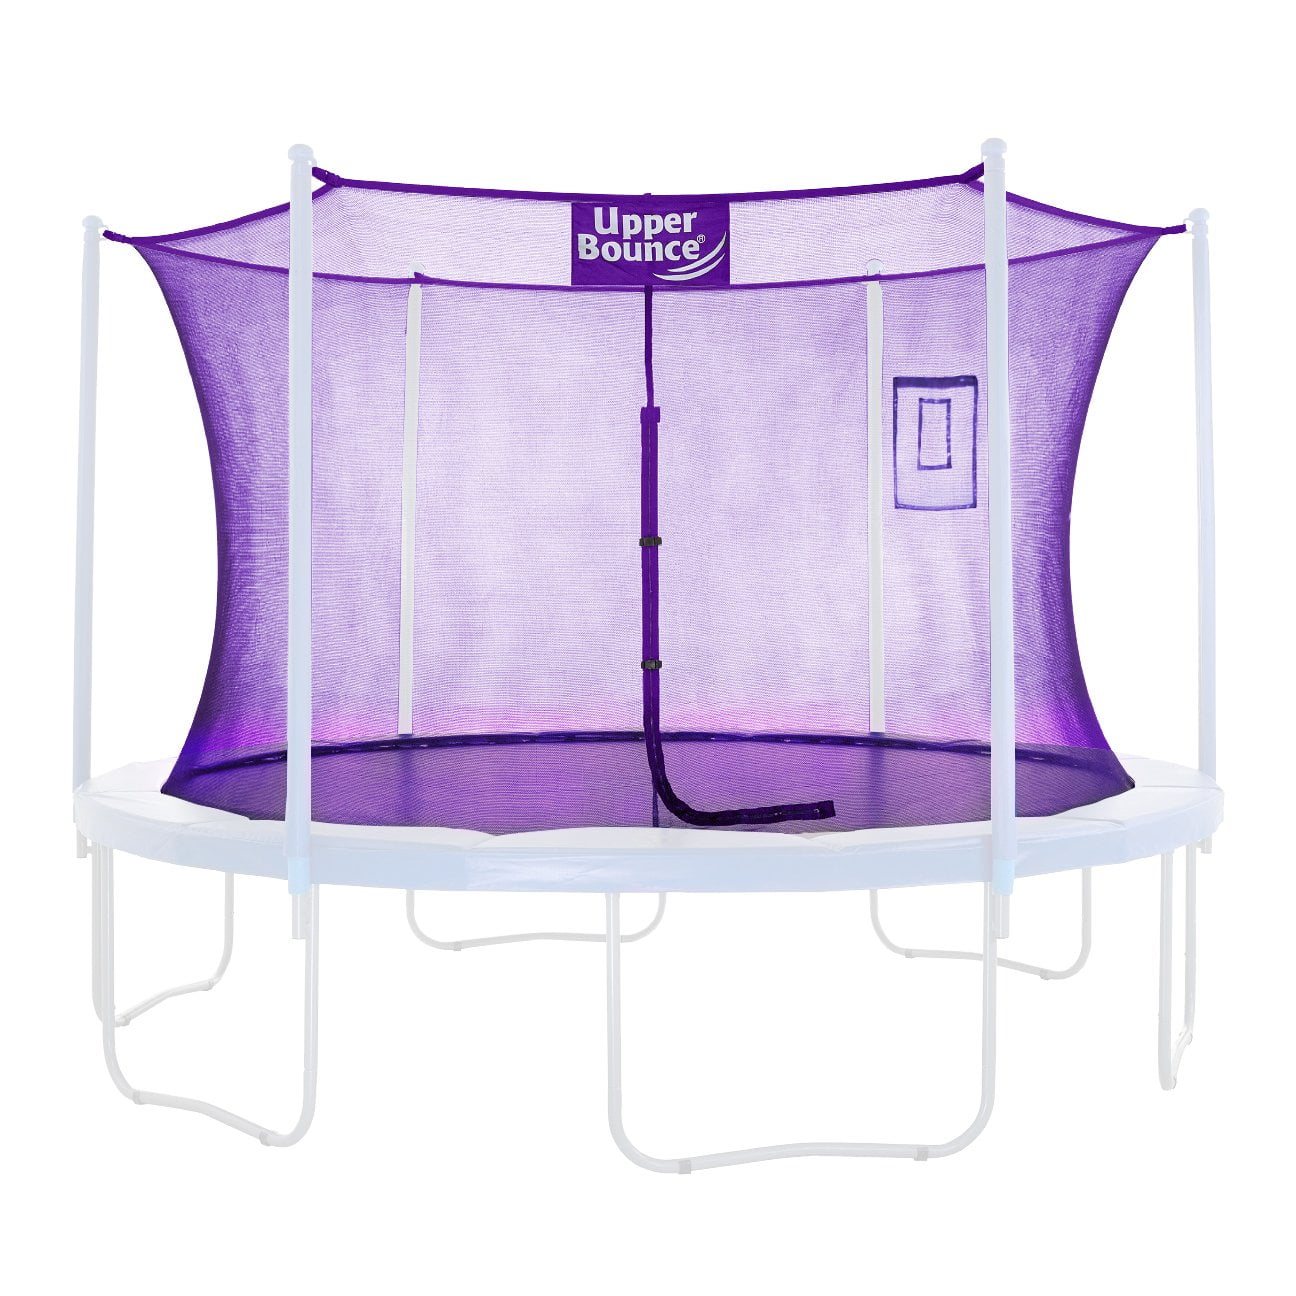 Machrus Upper Bounce Trampoline Net - Trampoline Safety Net Fits 15 ft  Round Trampolines using 3 Arches - Trampoline Net with Smartphone/Tablet  Pouch for Selfies and Livestream - Purple 